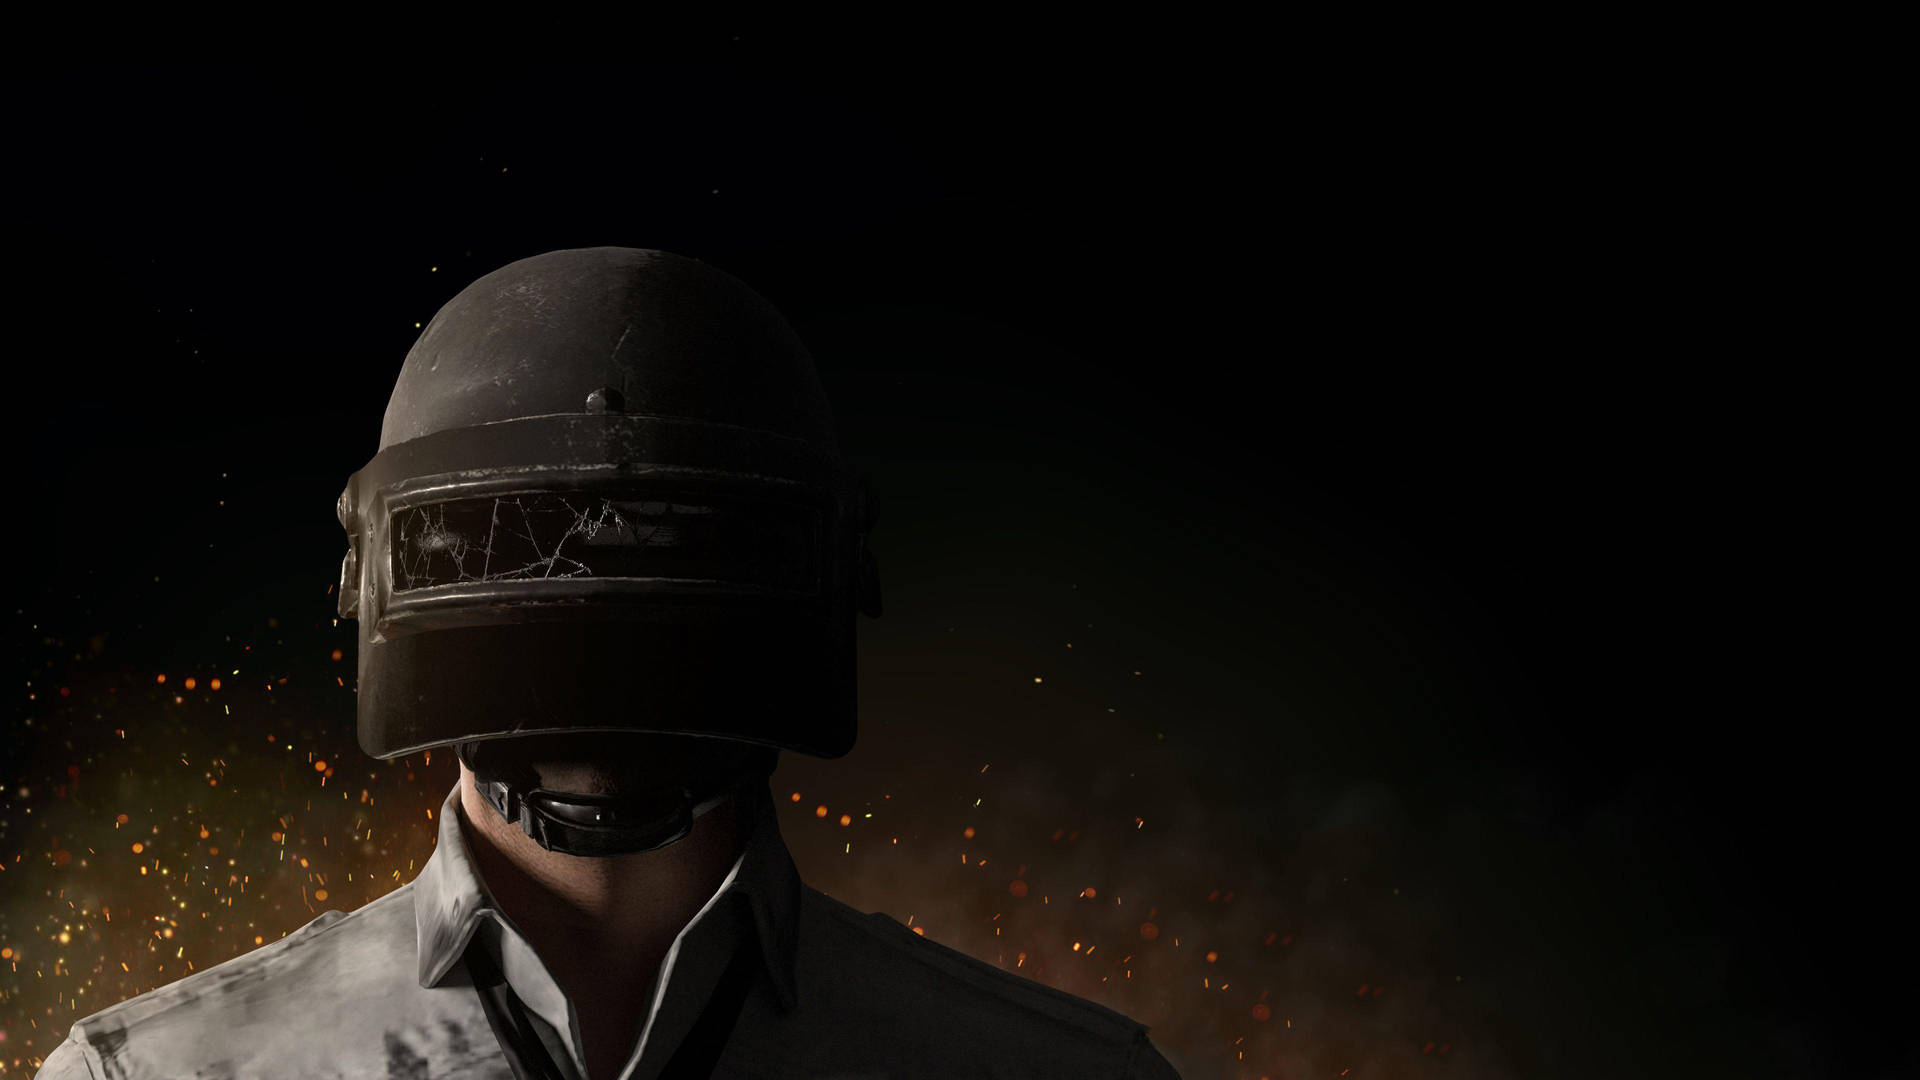 Pubg Hd Helmet Character And Orange Particles